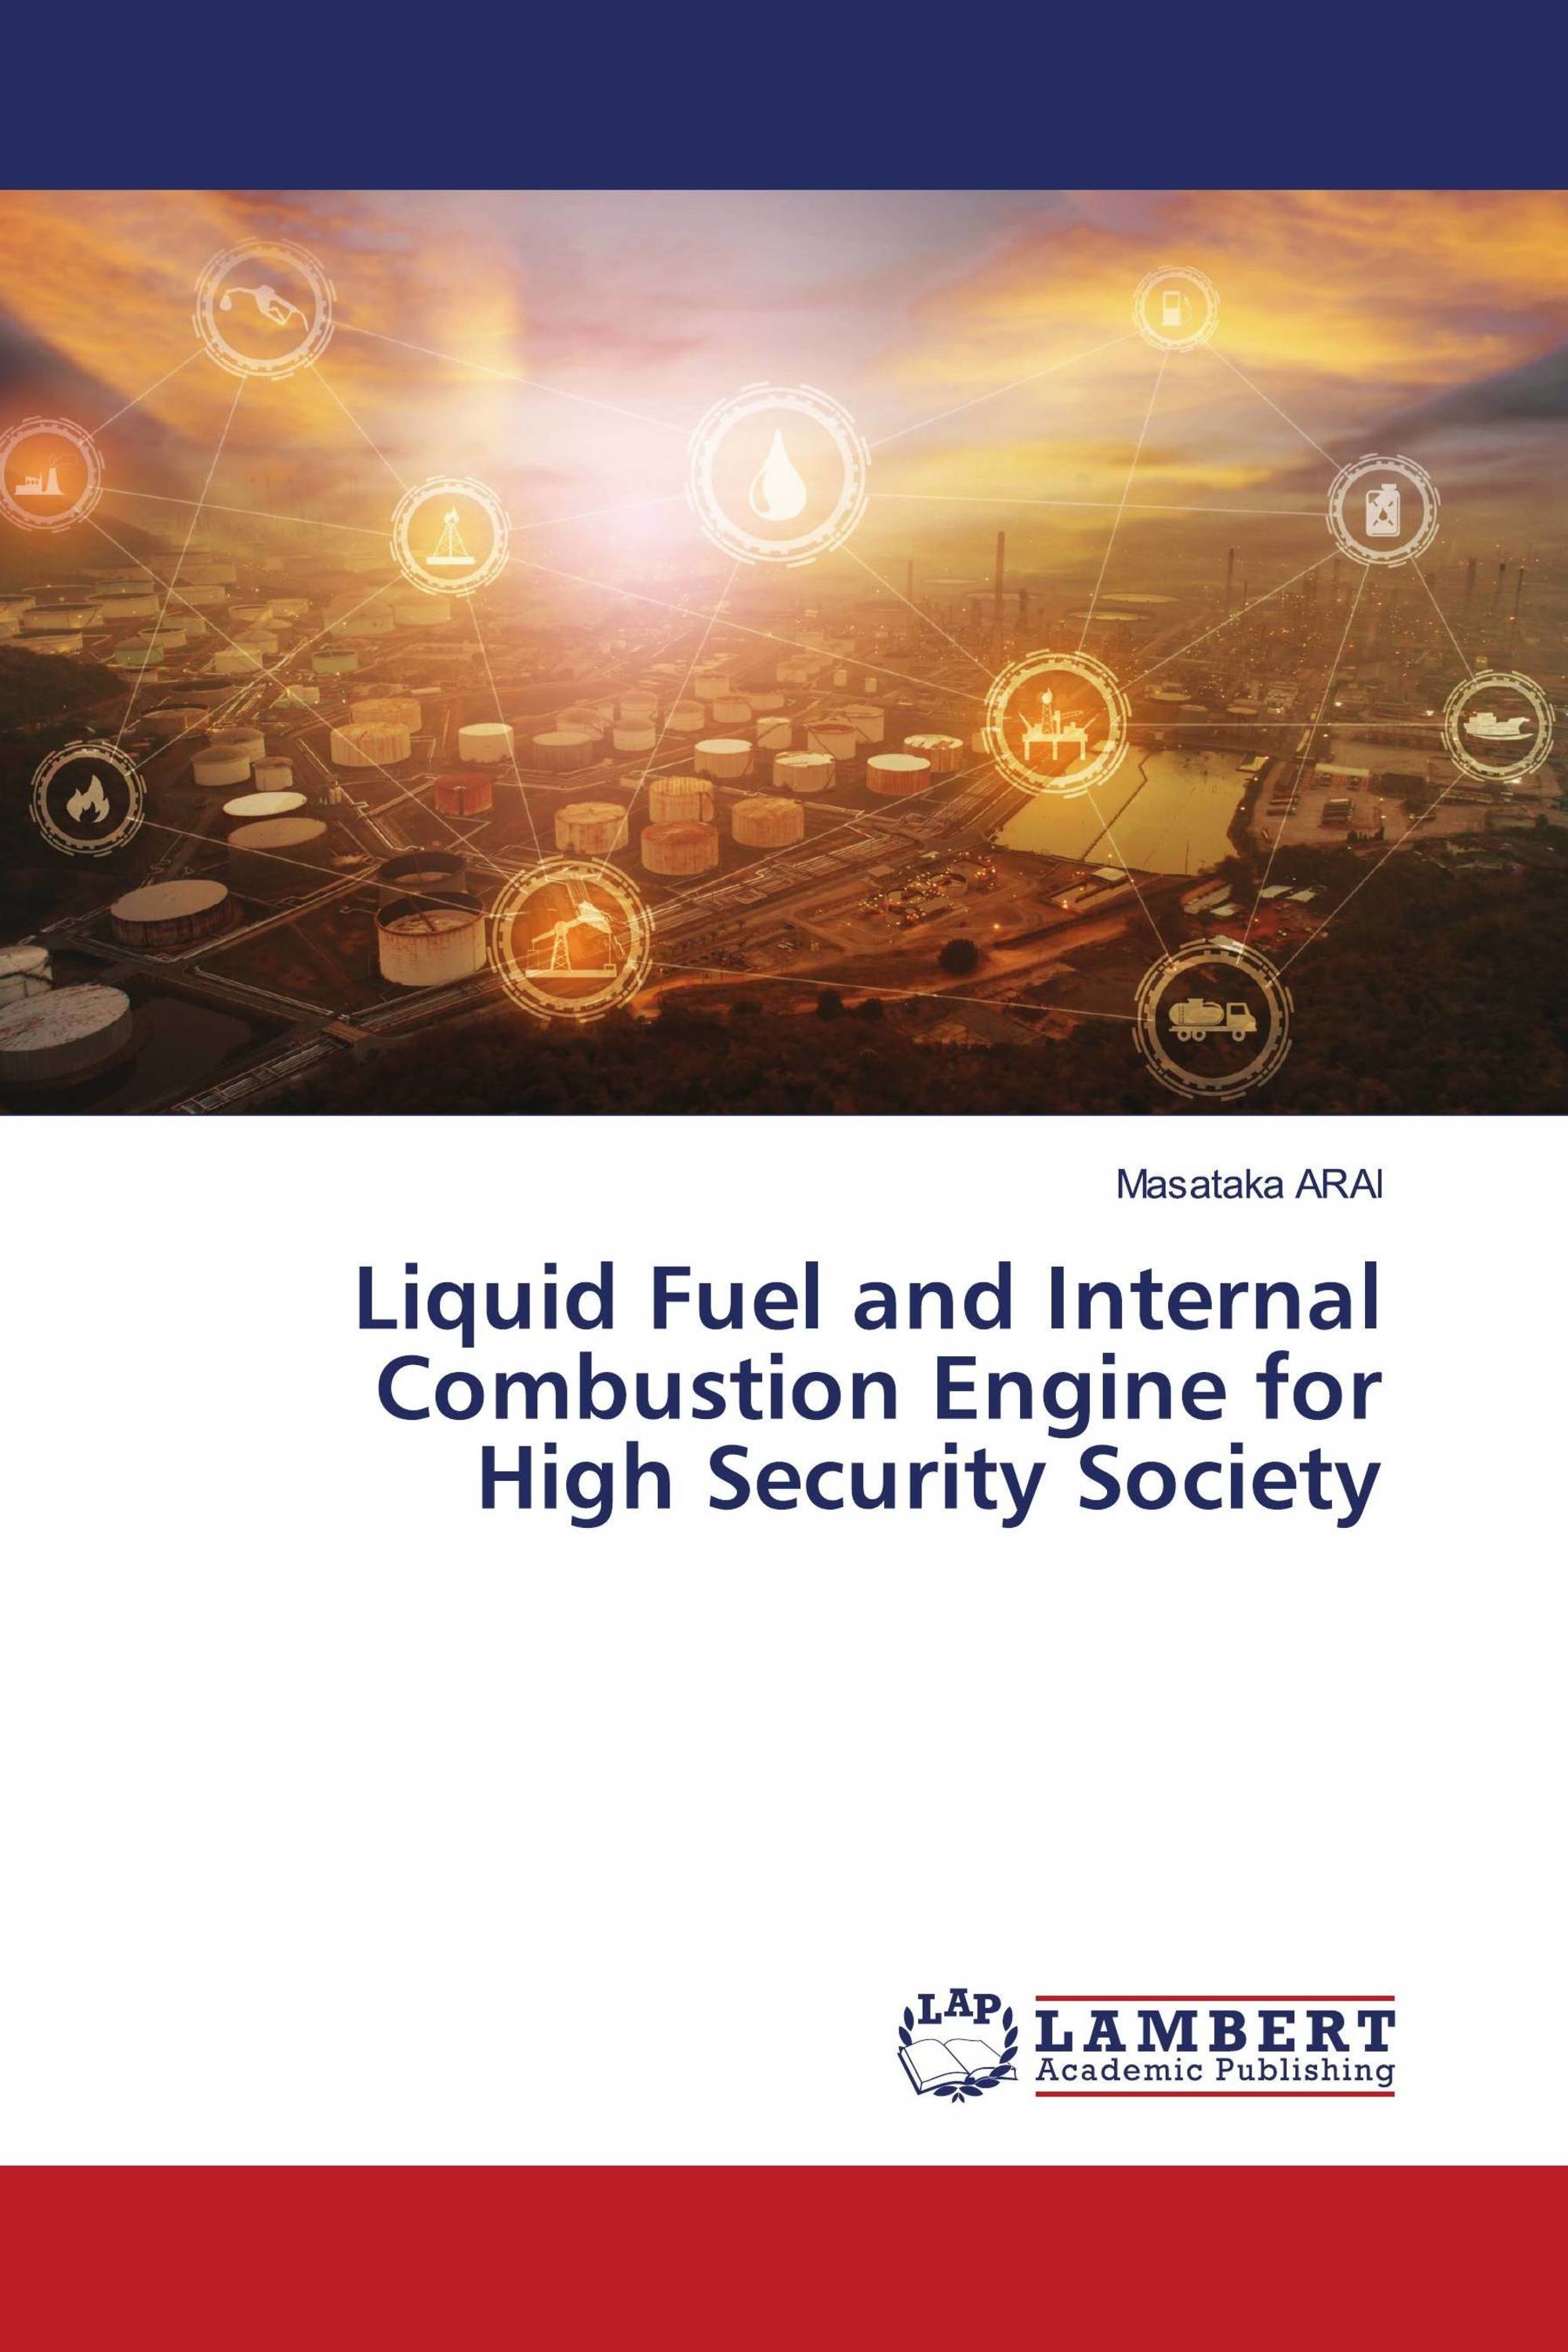 Liquid Fuel and Internal Combustion Engine for High Security Society